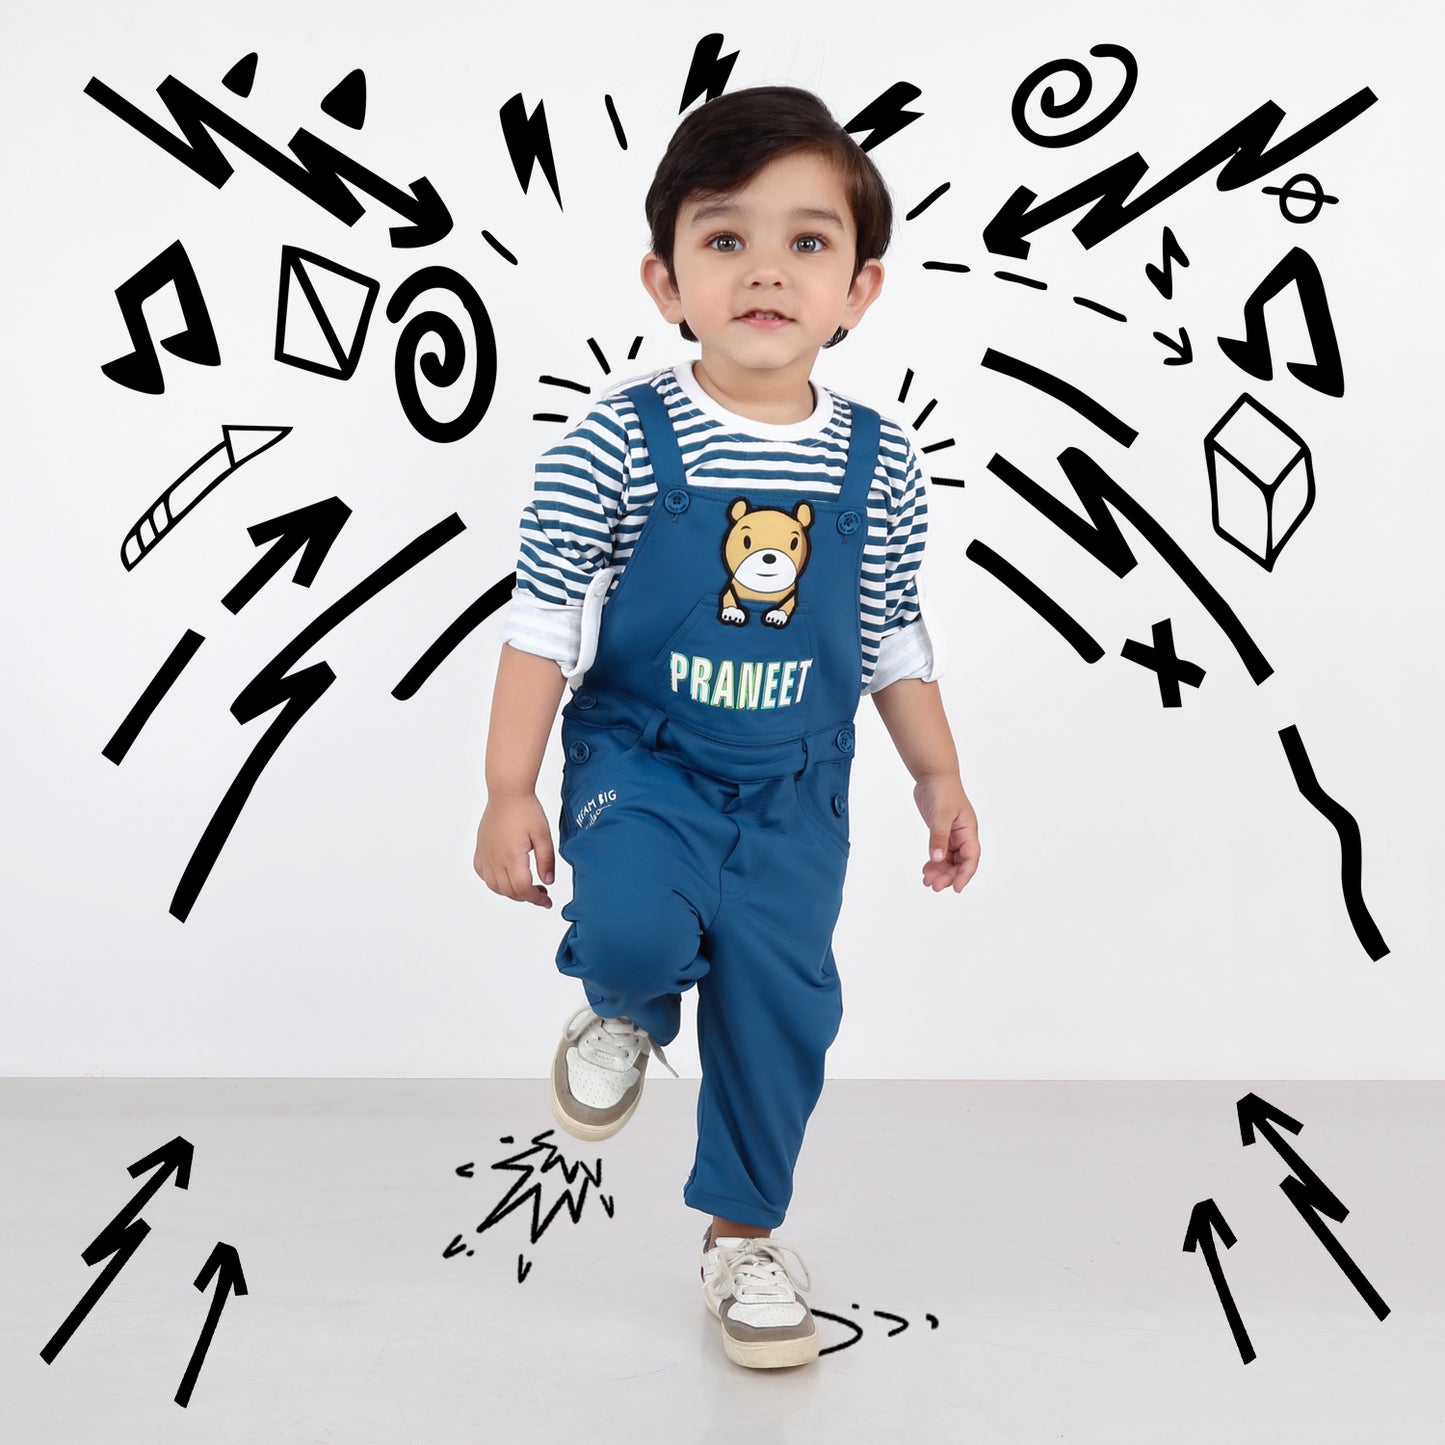 Personalized Dungaree Set: Your Little One's Name in Style!